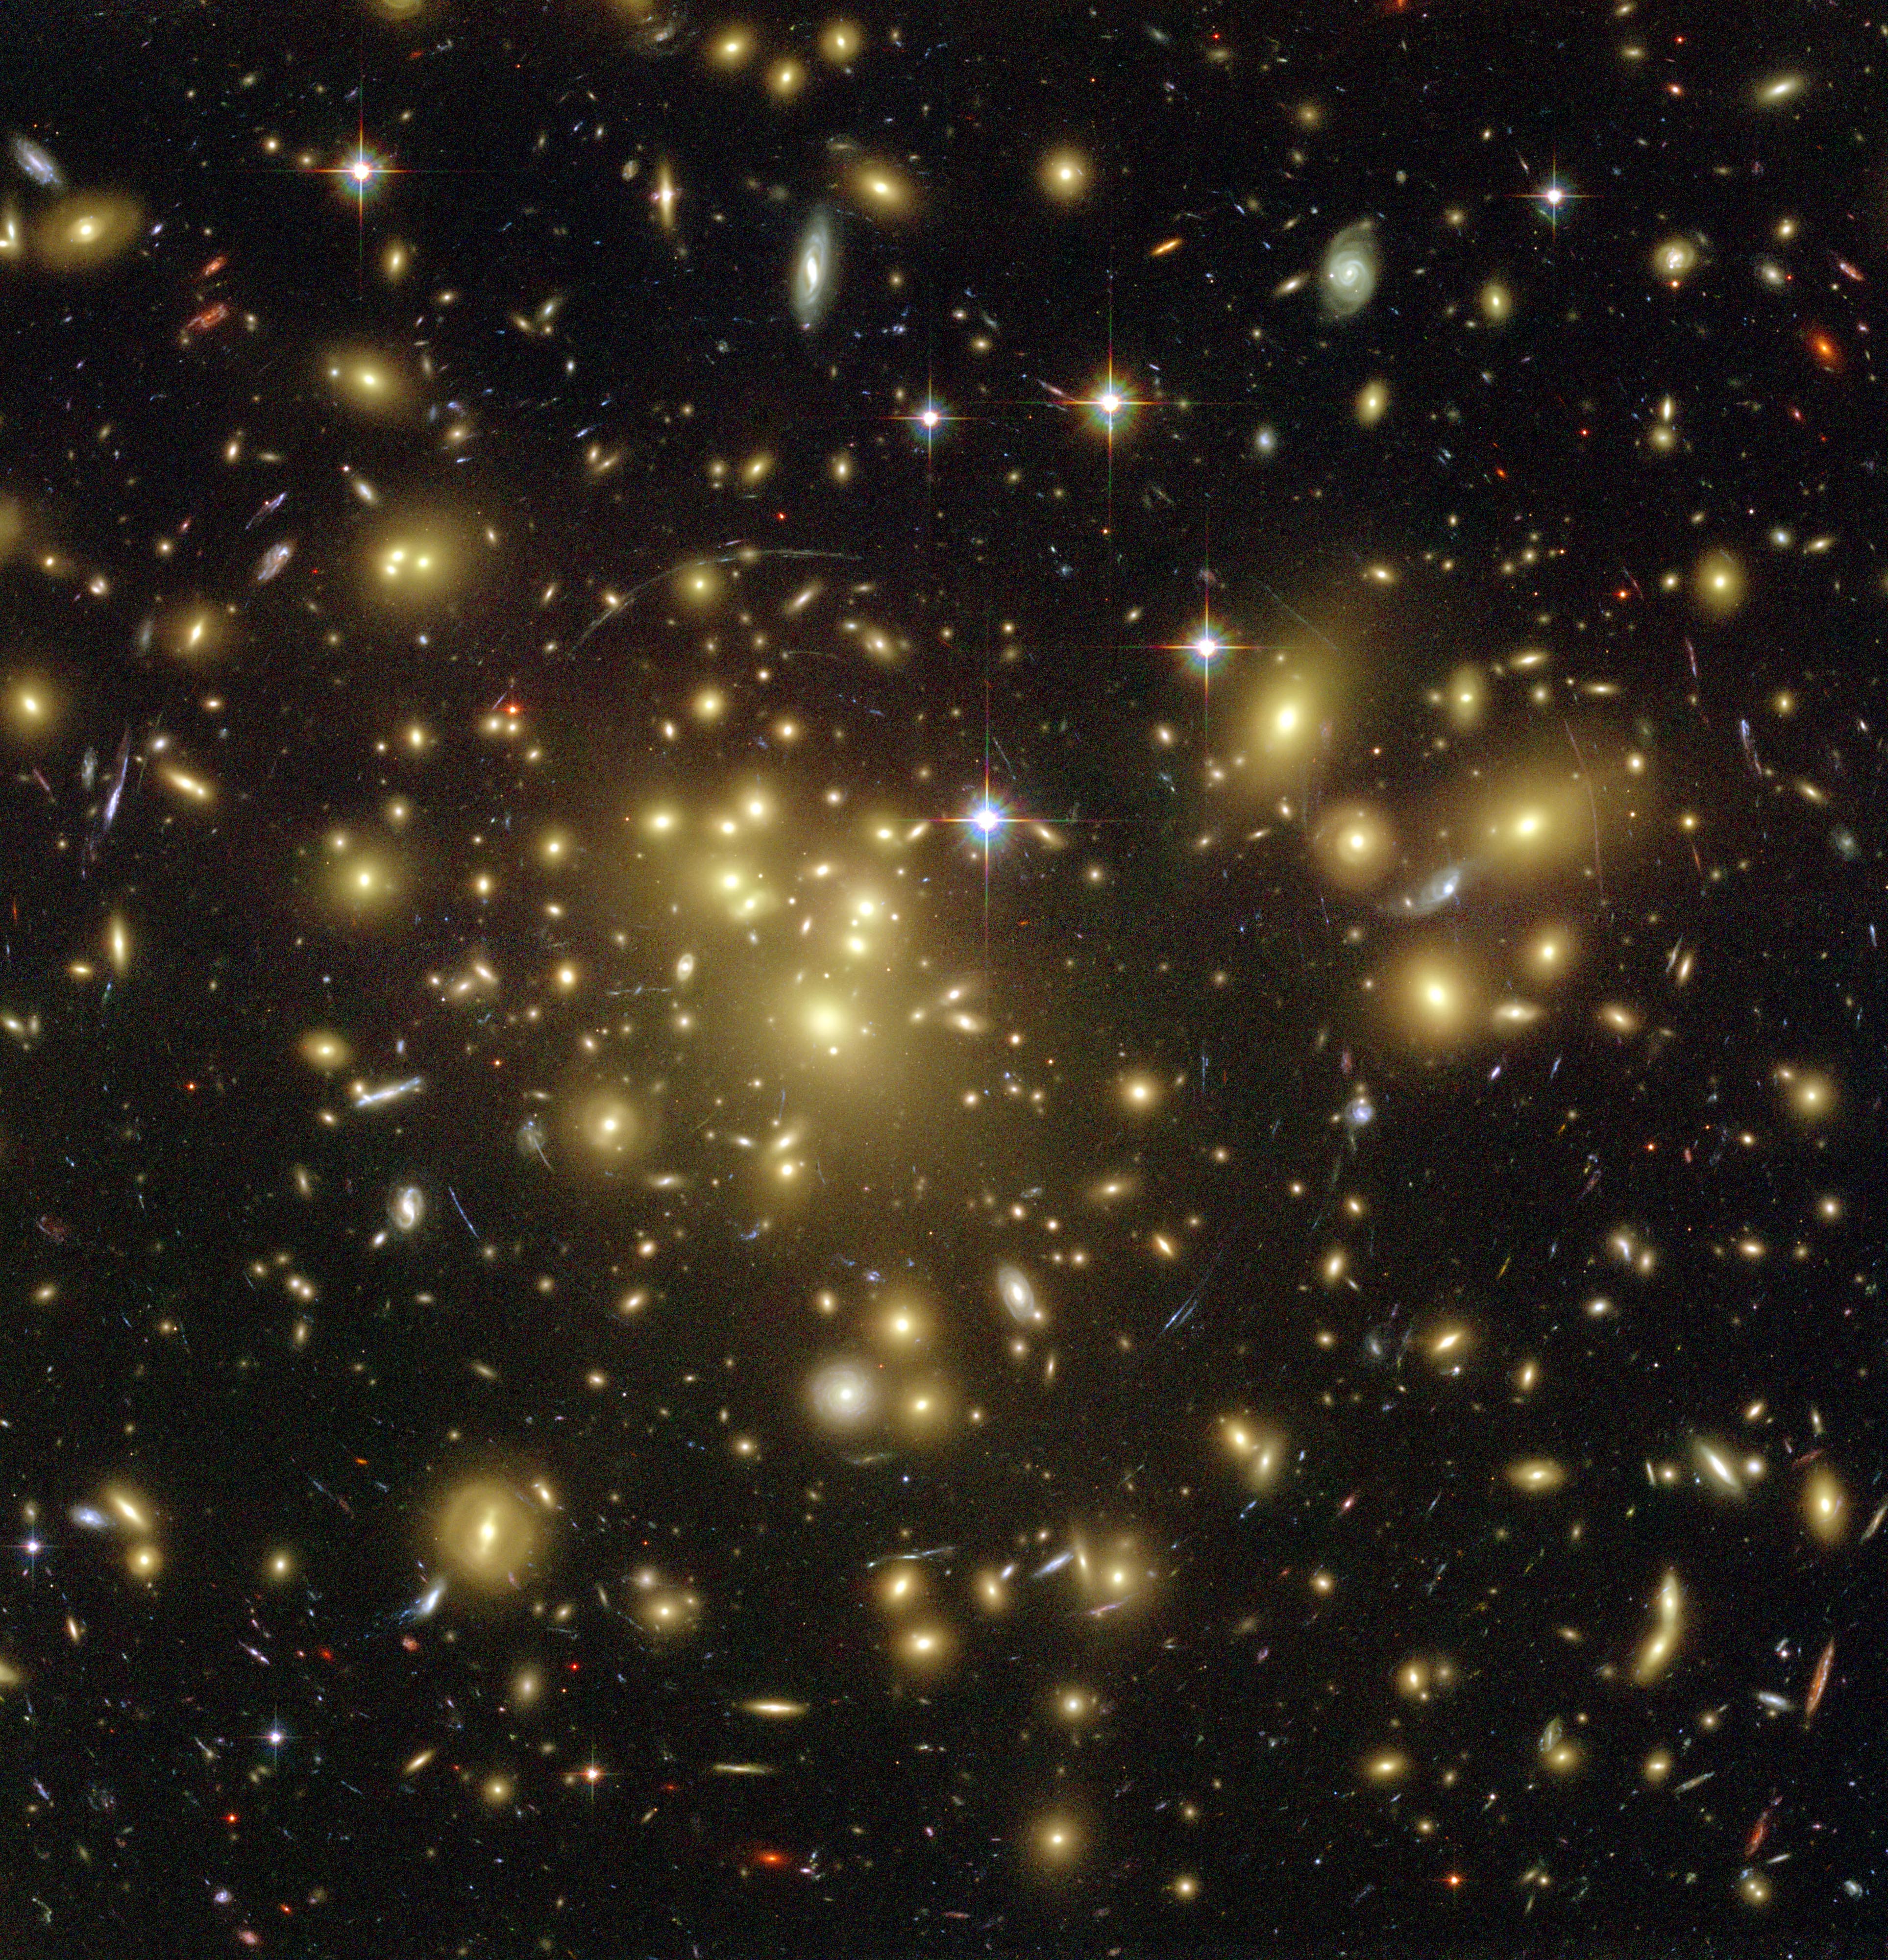 Yellowish galaxies with red and blue distorted background galaxies